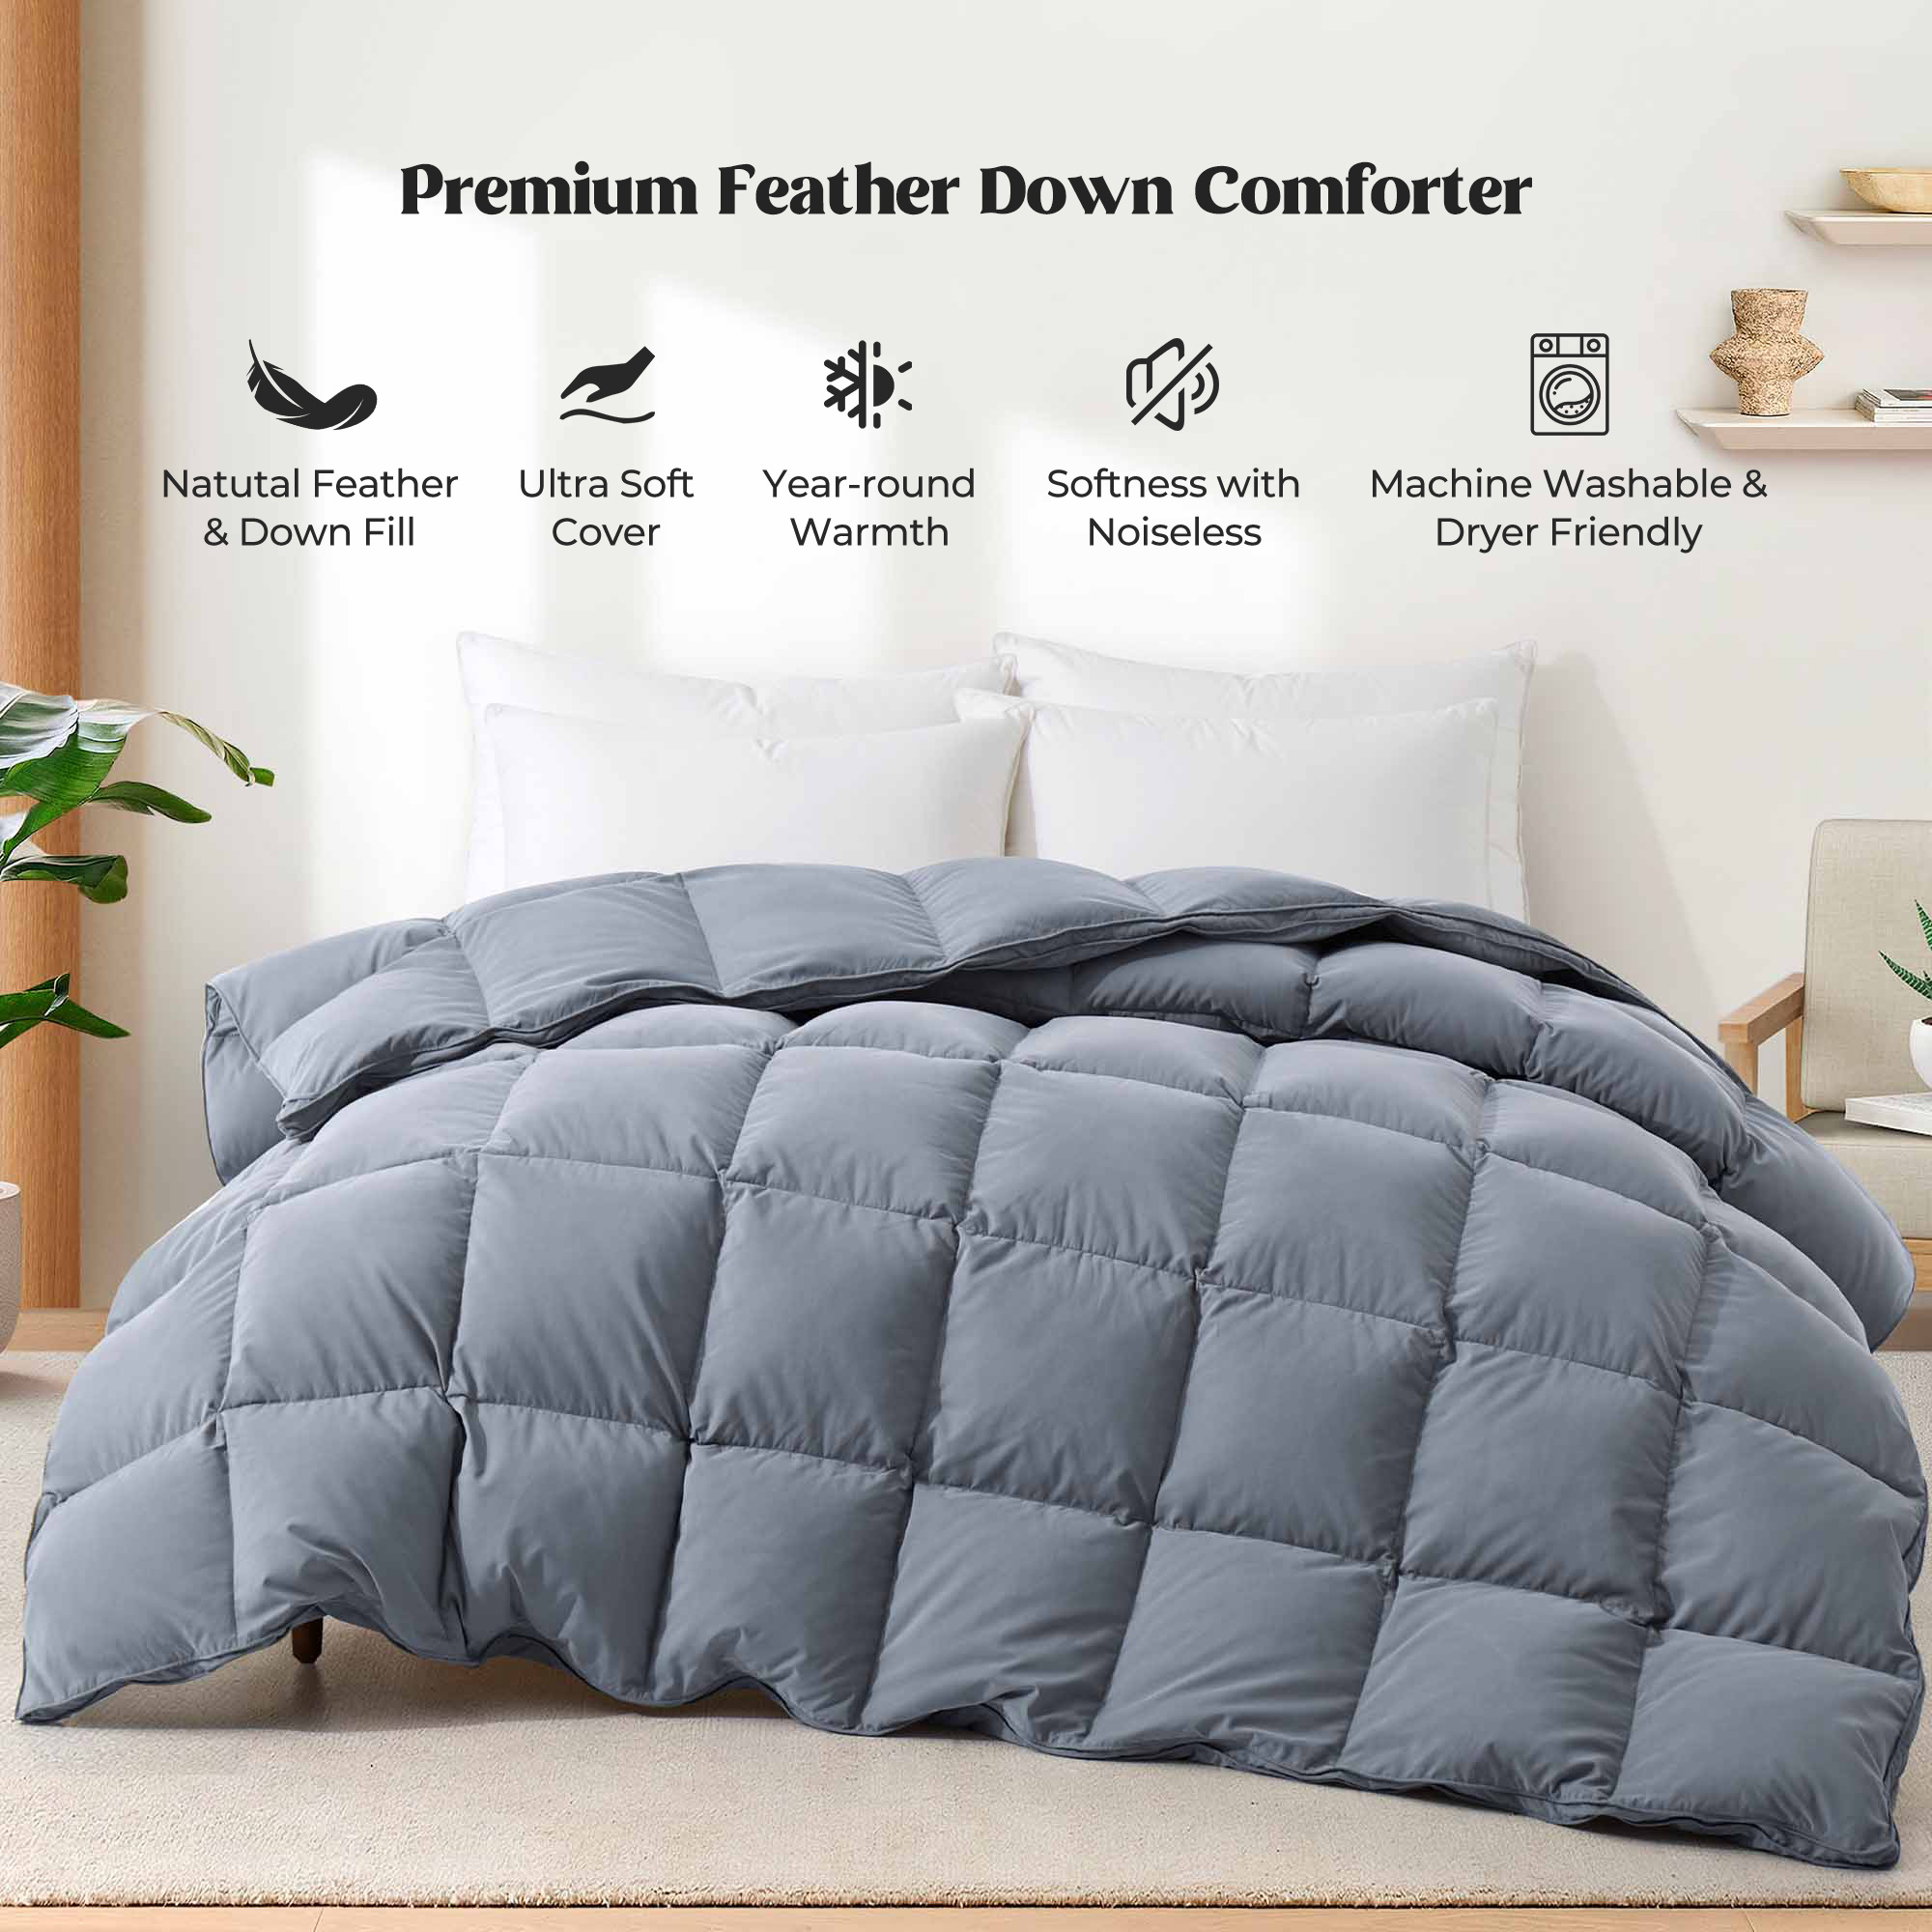 Medium Weight Goose Feather And Down Comforter - White, Twin